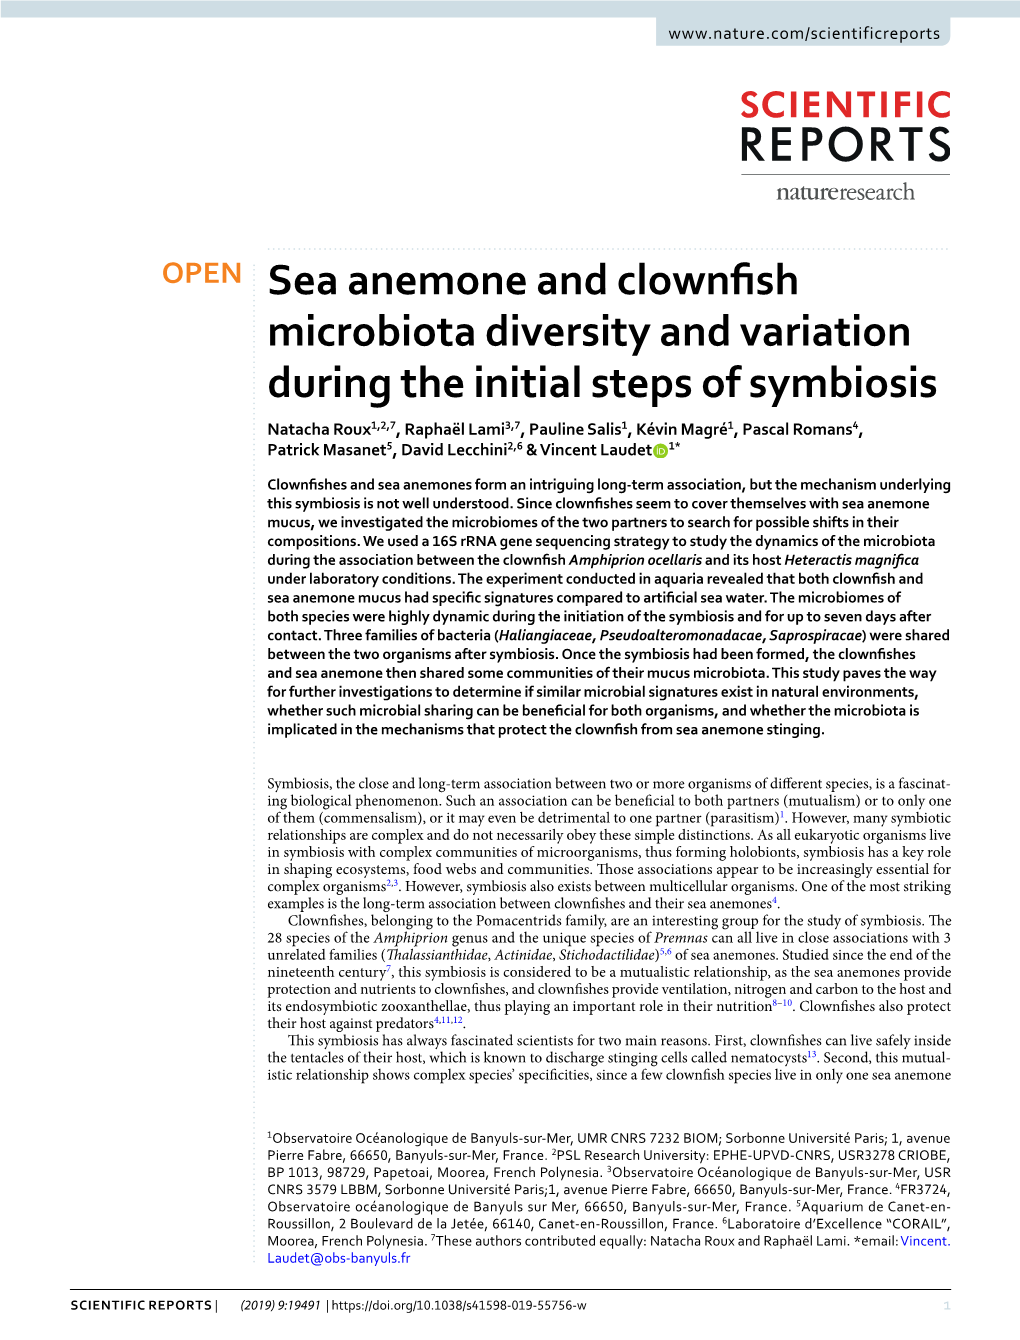 Sea Anemone and Clownfish Microbiota Diversity and Variation